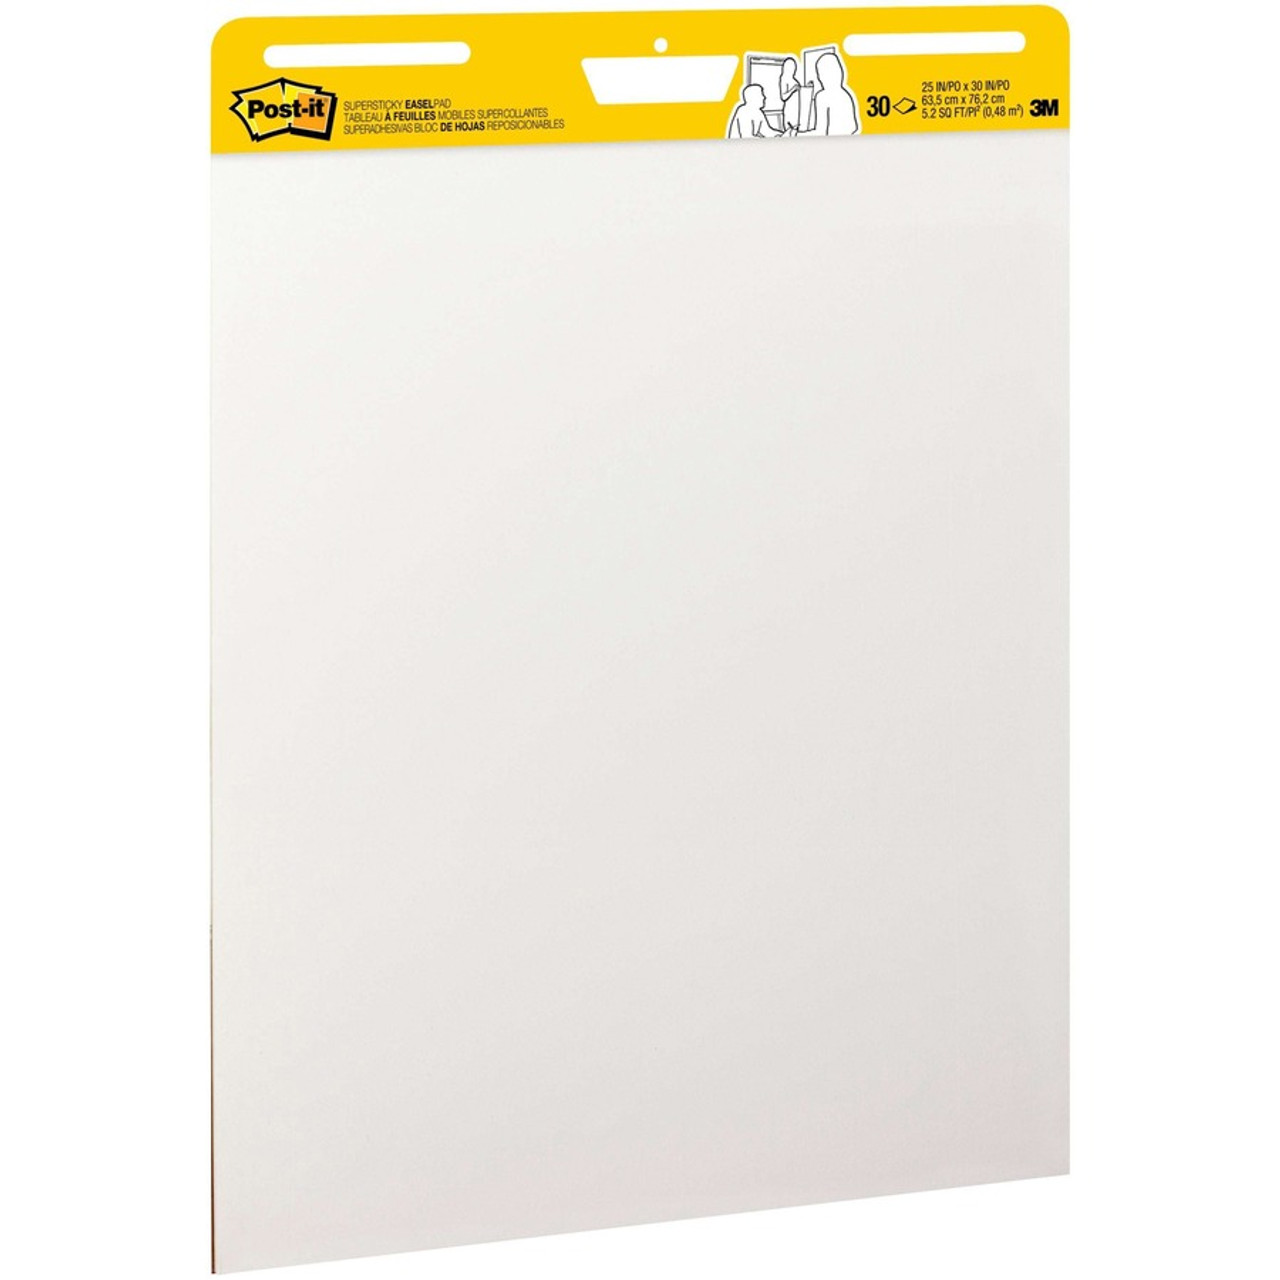 Post-it Self-Stick Easel Pad 560SS, 25 in x 30 in, 30 shts/pad, White Paper w/Faint Blue Grid Lines